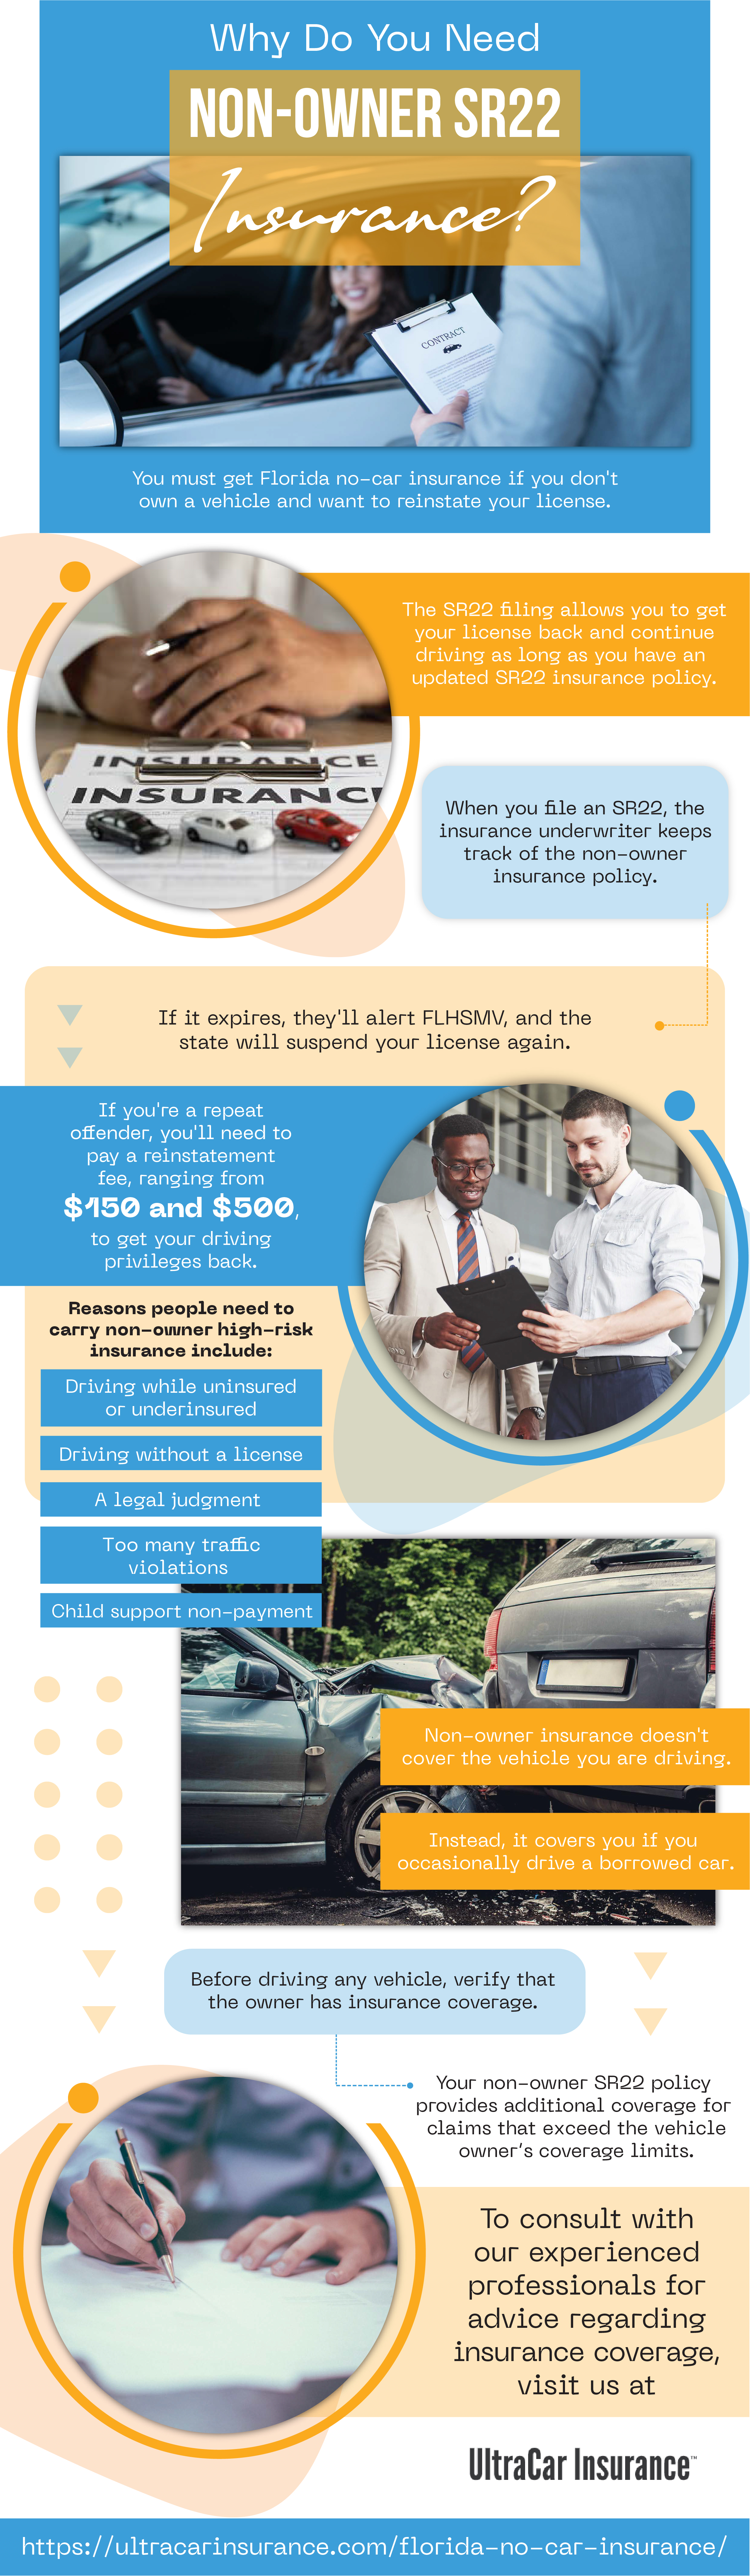 Why Do You Need Non-Owner SR22 Insurance Infograph